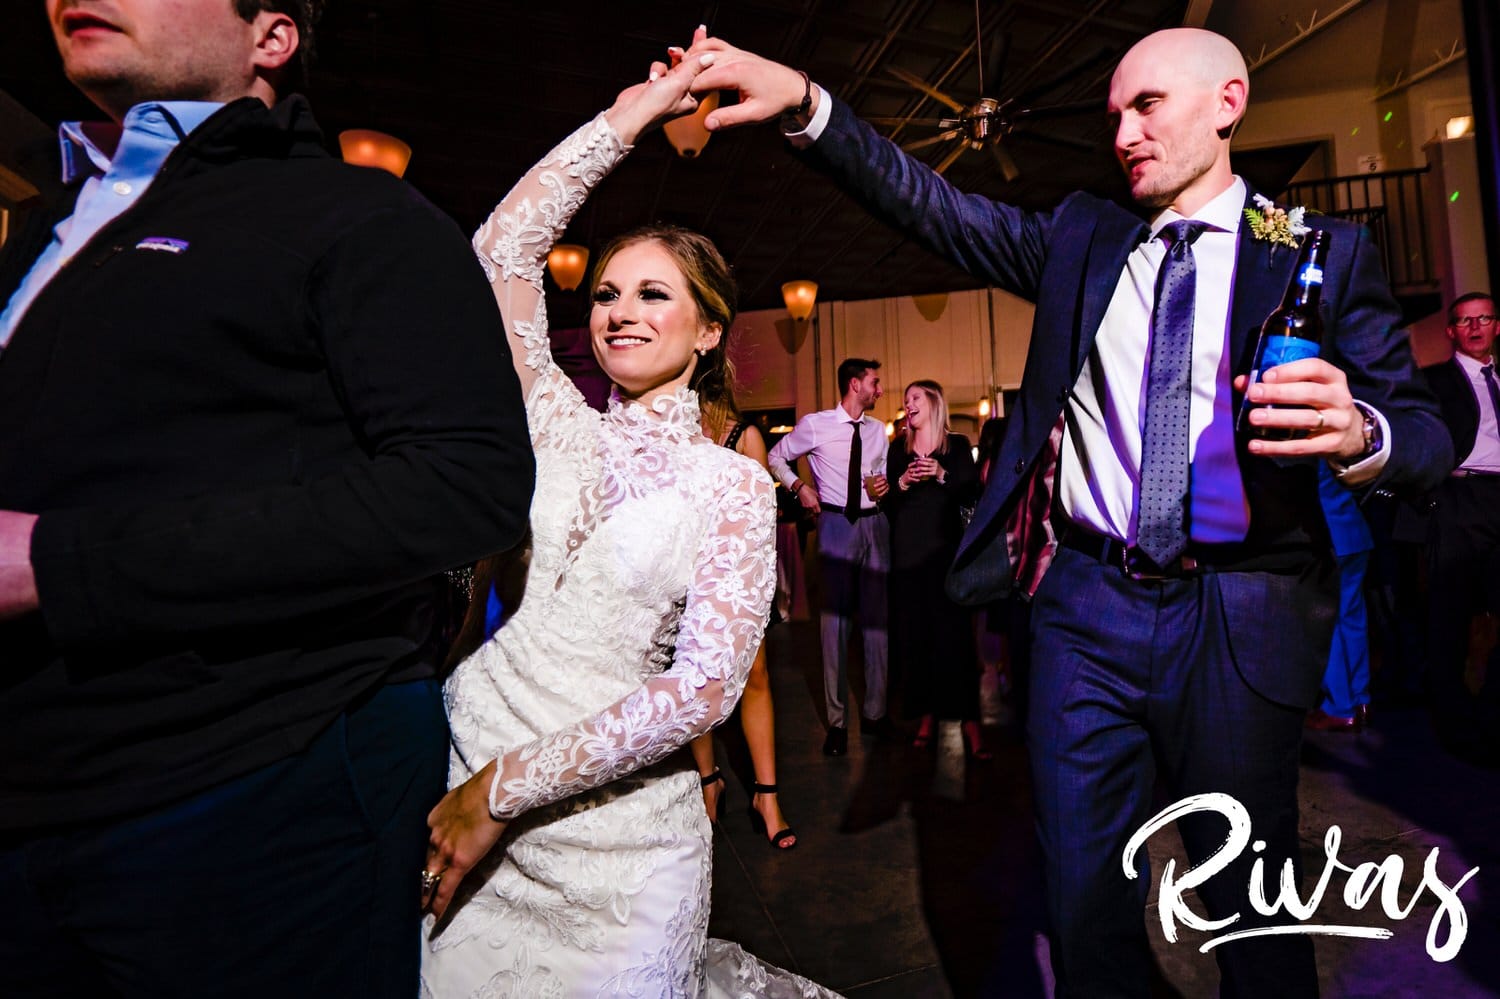 A colorful, candid picture of a groom twirling his bride under his arm during their winter wedding reception at The Station at 28 Event Space. 